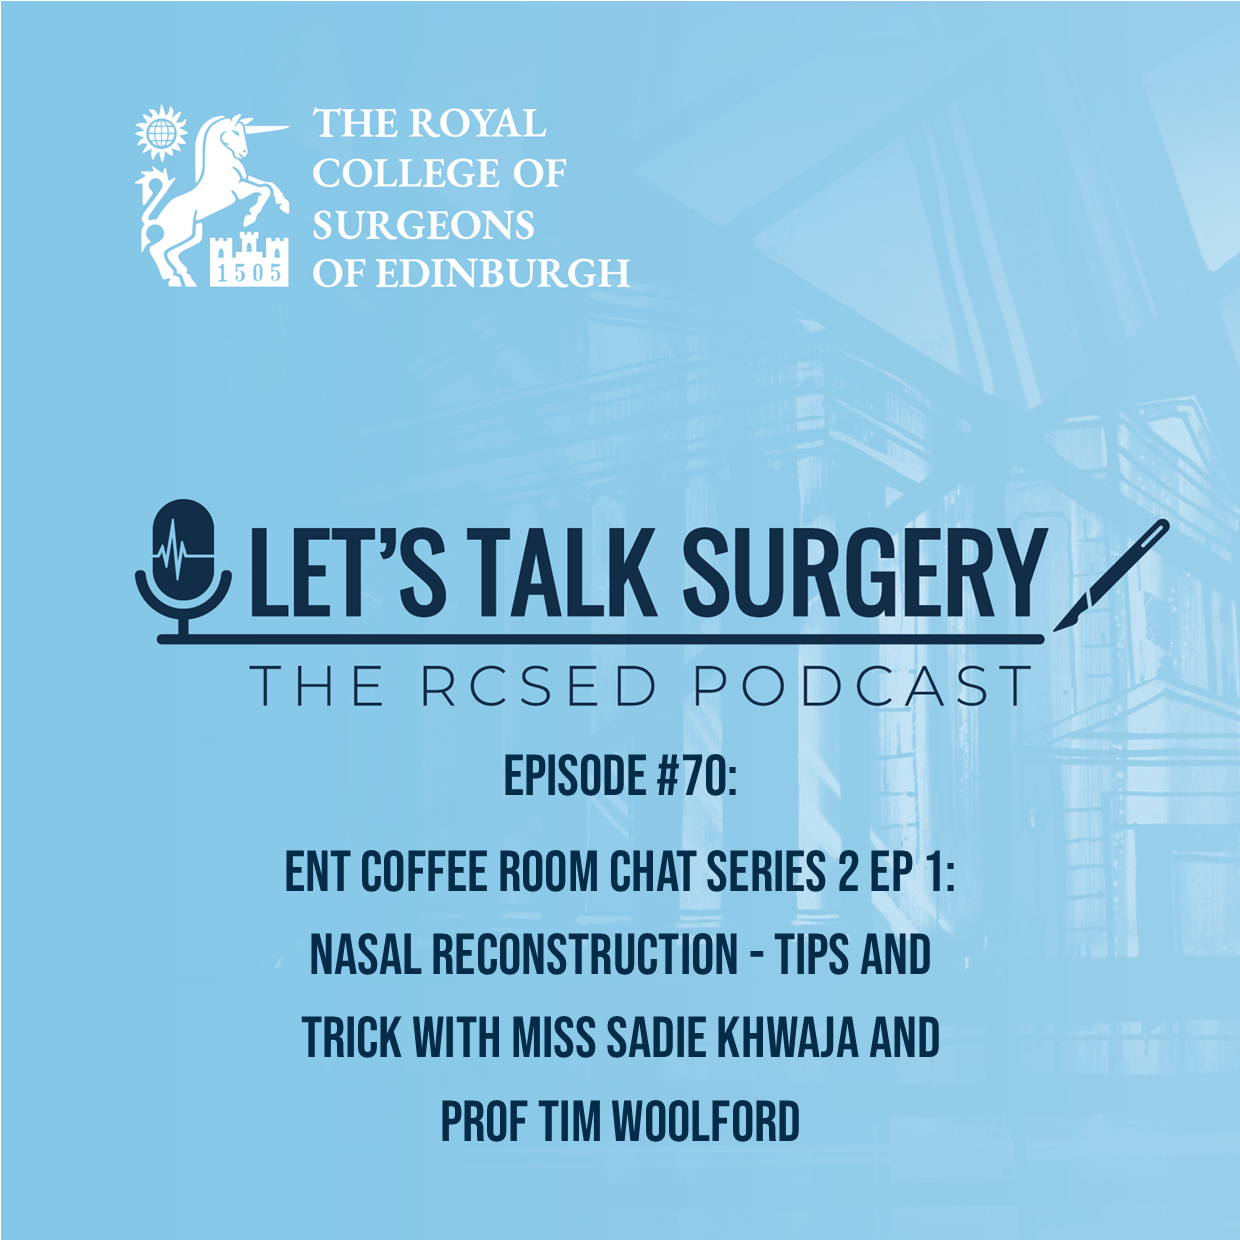 ENT Coffee Room Chat Series 2: Ep 1 - Nasal reconstruction - tips and trick with Miss Sadie Khwaja and Prof Tim Woolford